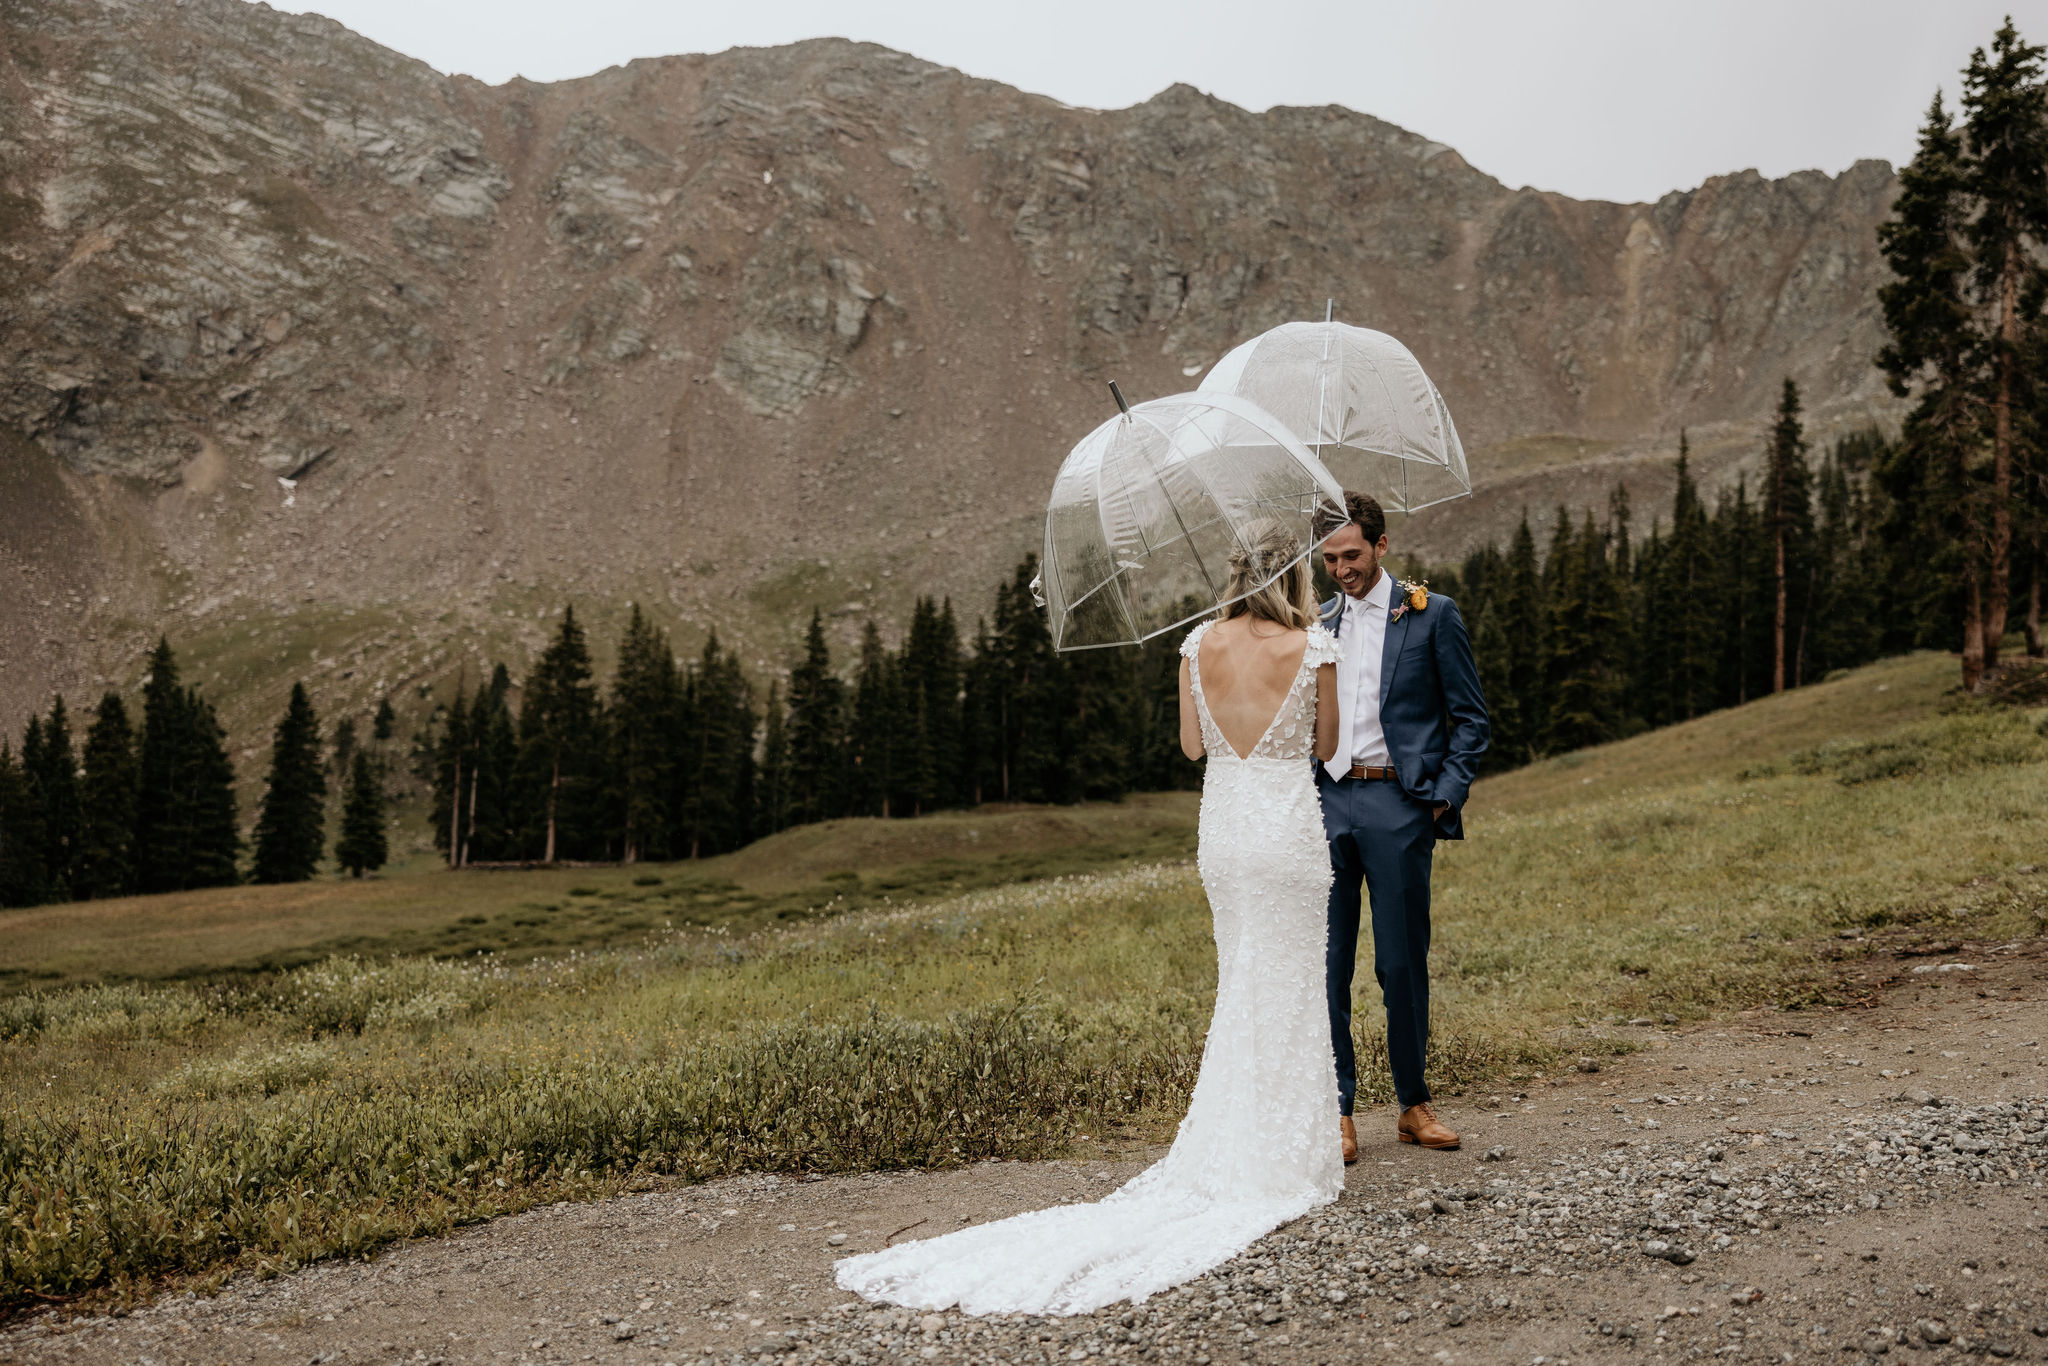 bride and groom hold umbrellas during wedding day first look in the mountains.